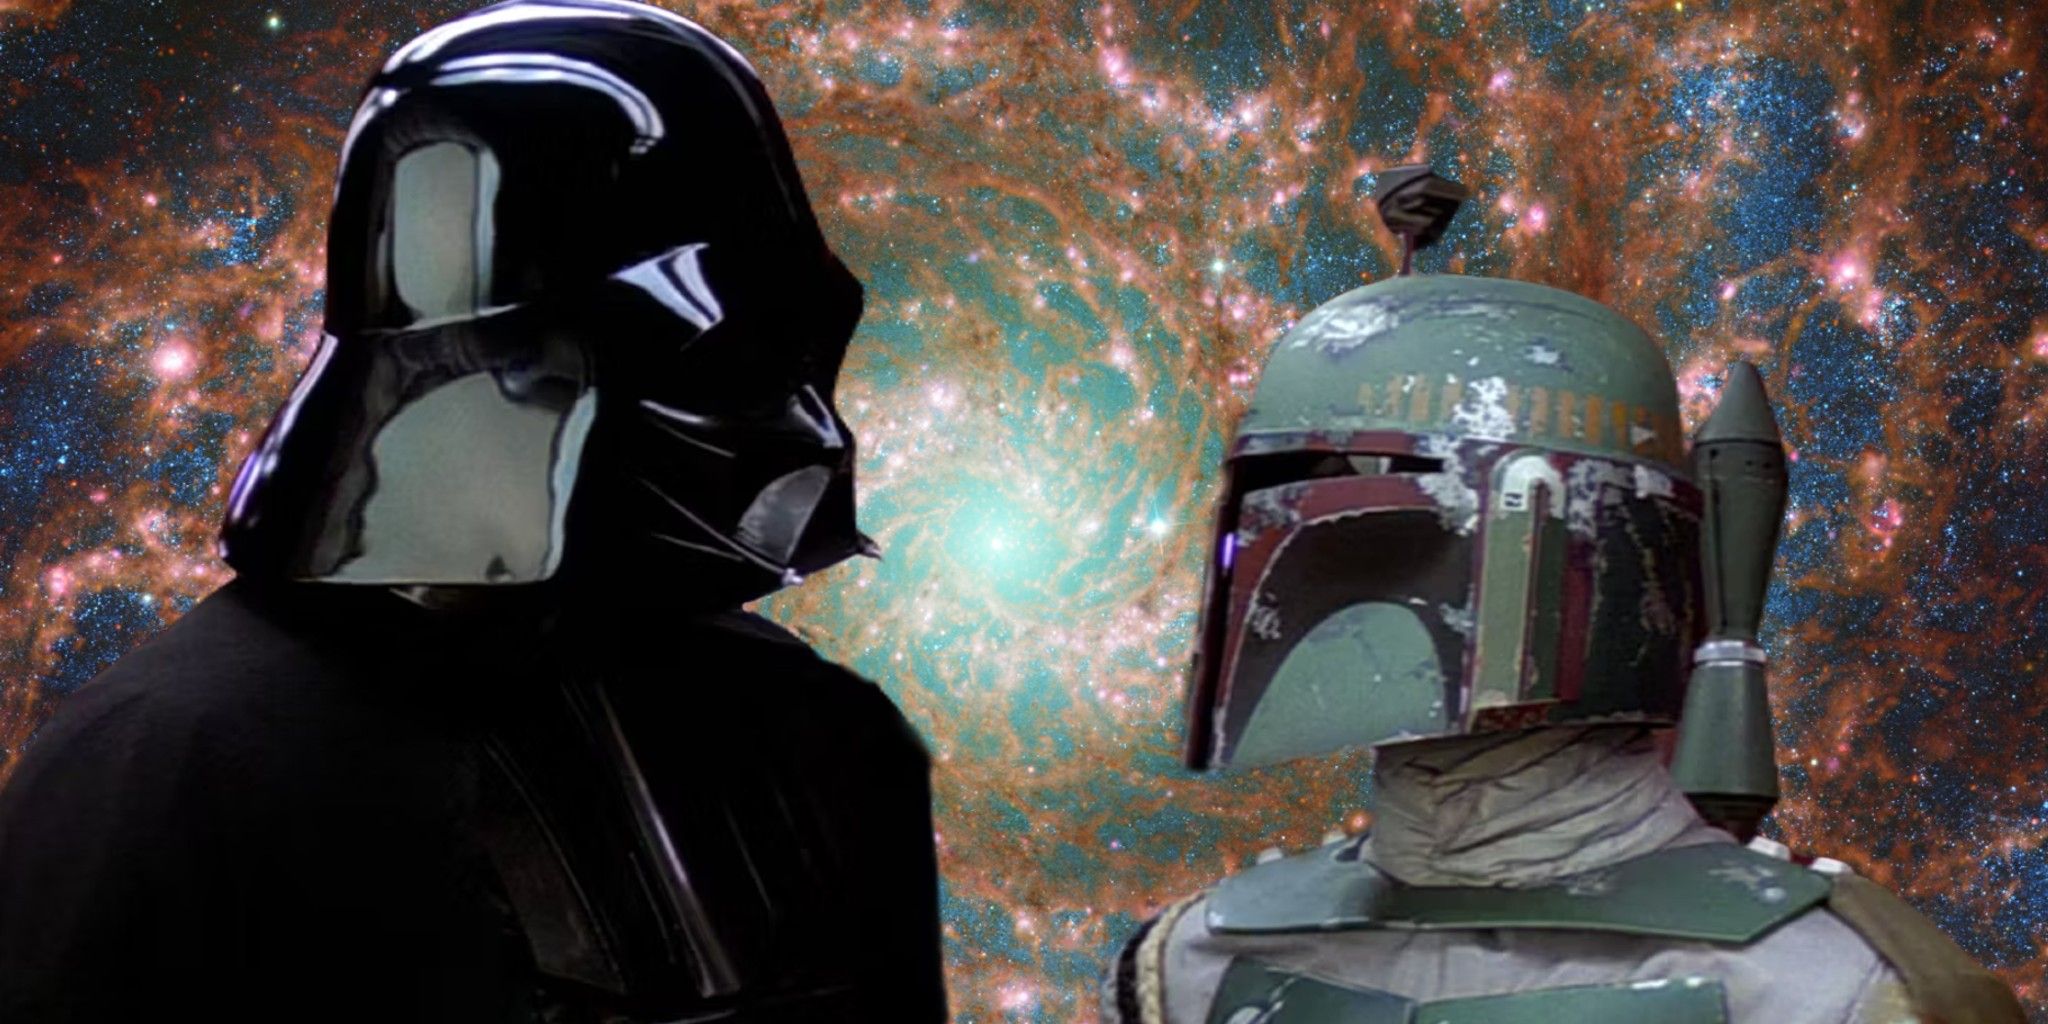 Darth Vader and Boba Fett standing face to face against a backdrop of a celestial body in Star Wars: Episode V - The Empire Strikes Back